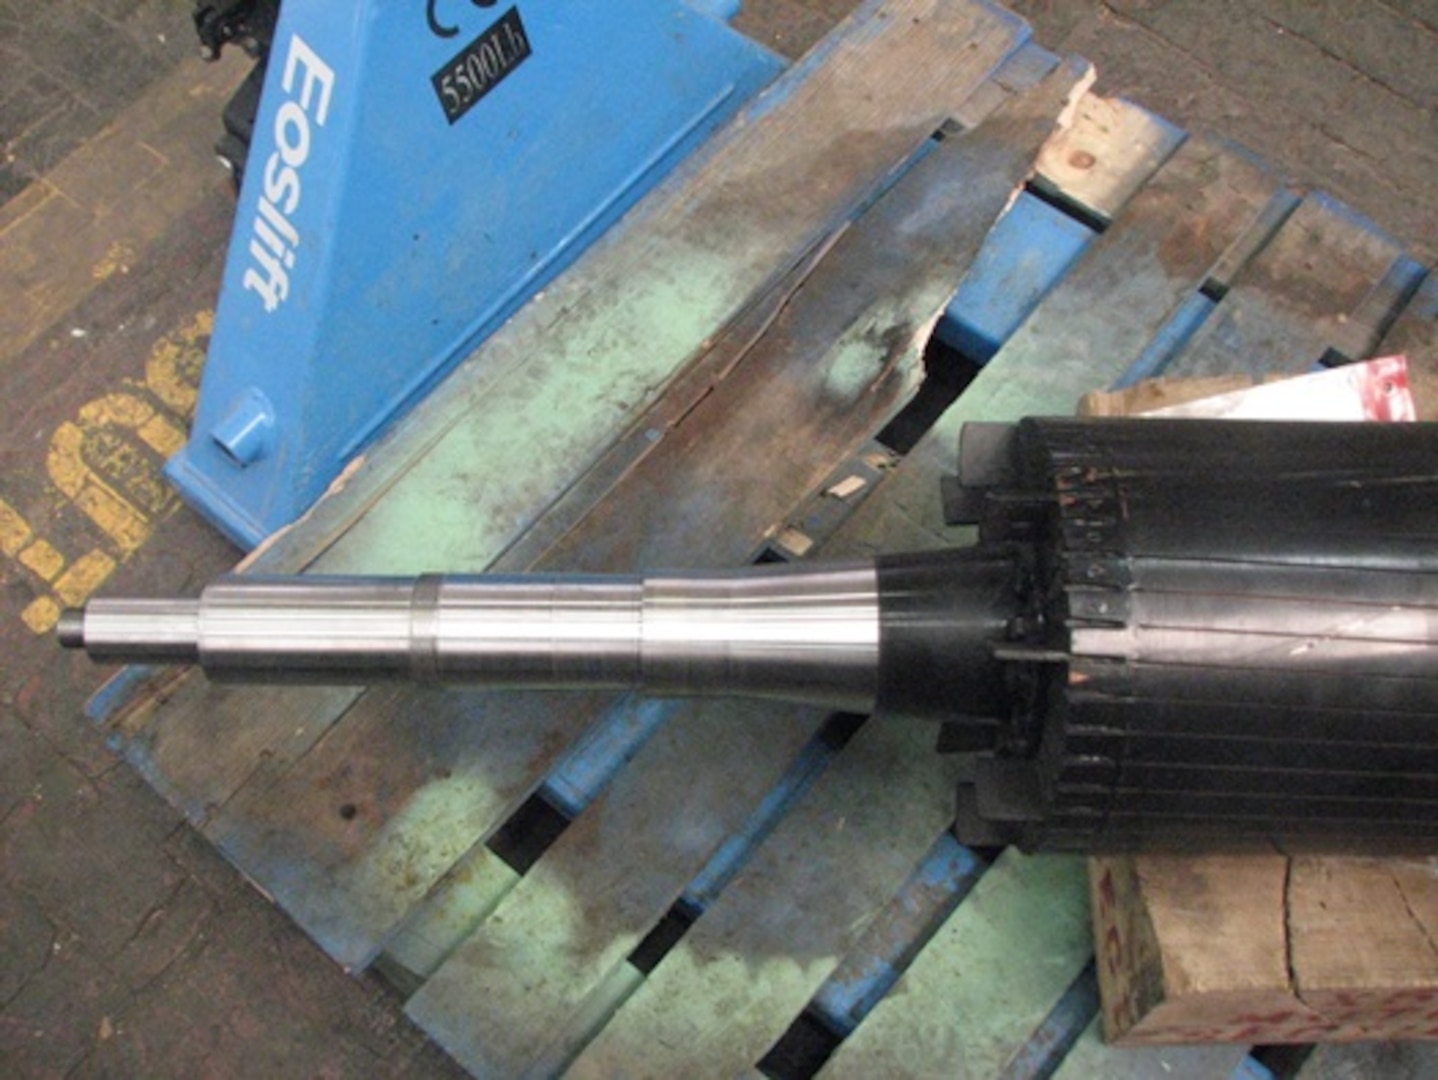 Final machining took place for the component Apr. 1.